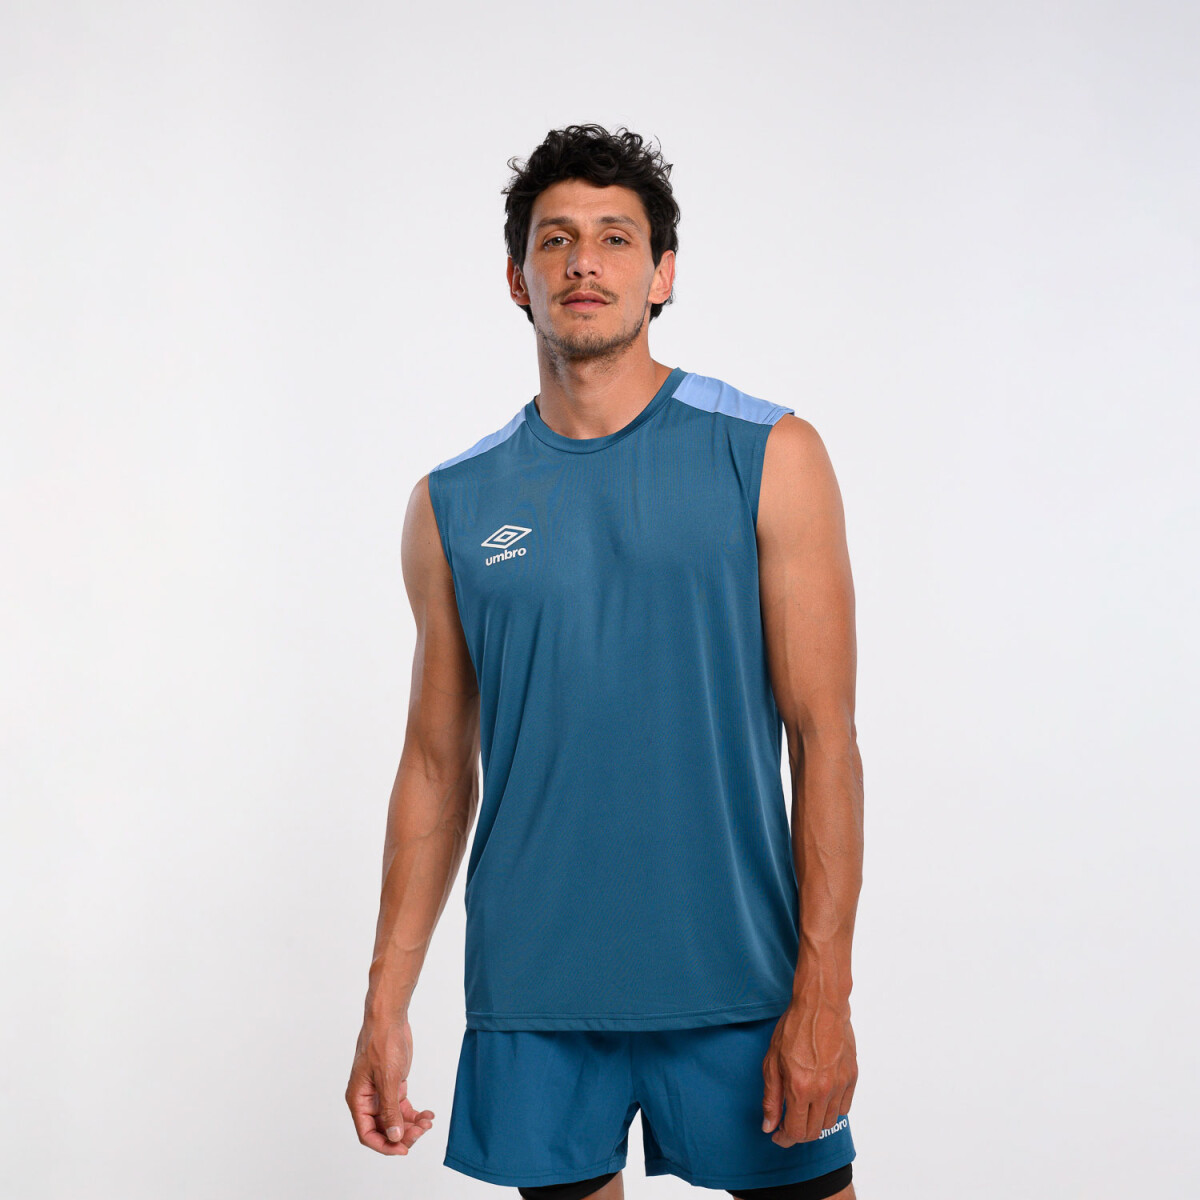 Musculosa Combined Loose Umbro Hombre - 0o7 